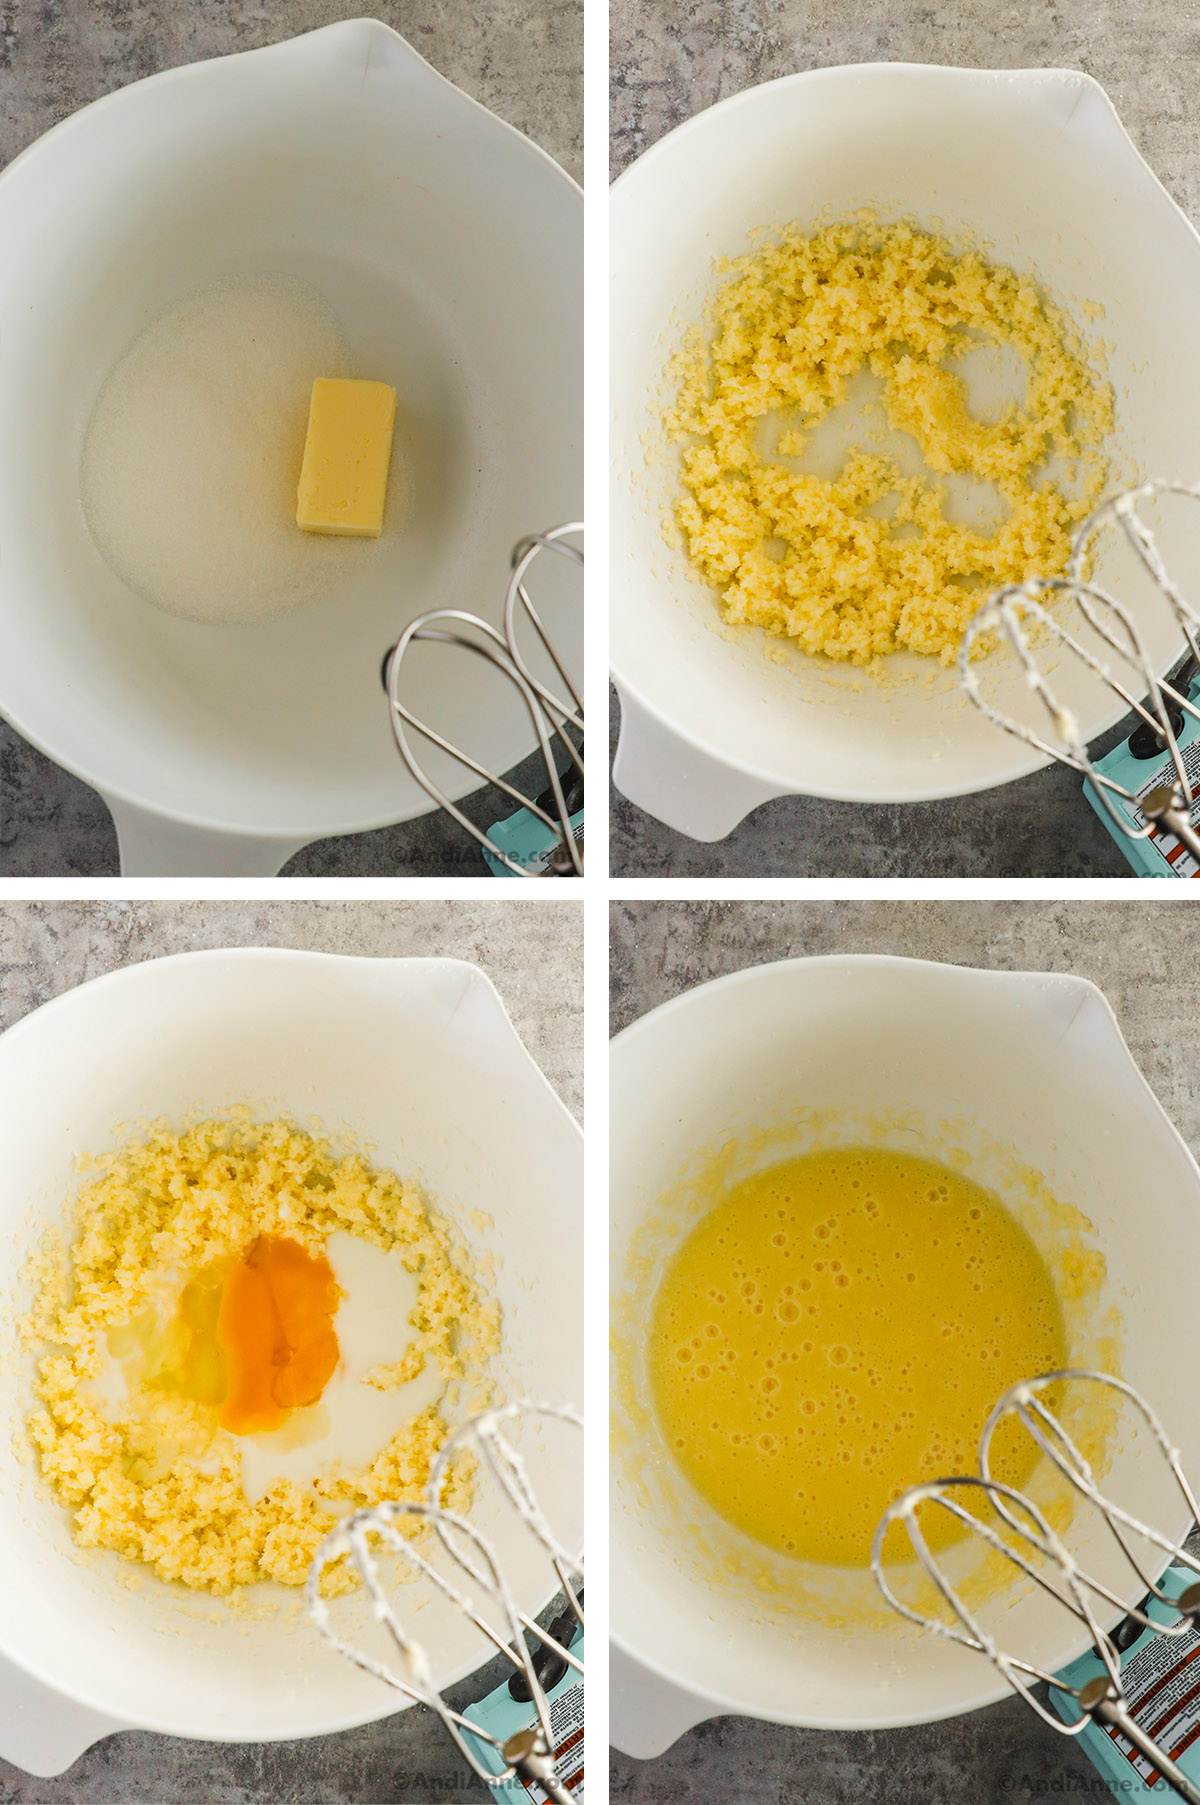 Four images of a bowl. First is butter and sugar. Second is creamed butter, third has eggs and milk dumped in. Fourth is a yellow liquid all blended together.